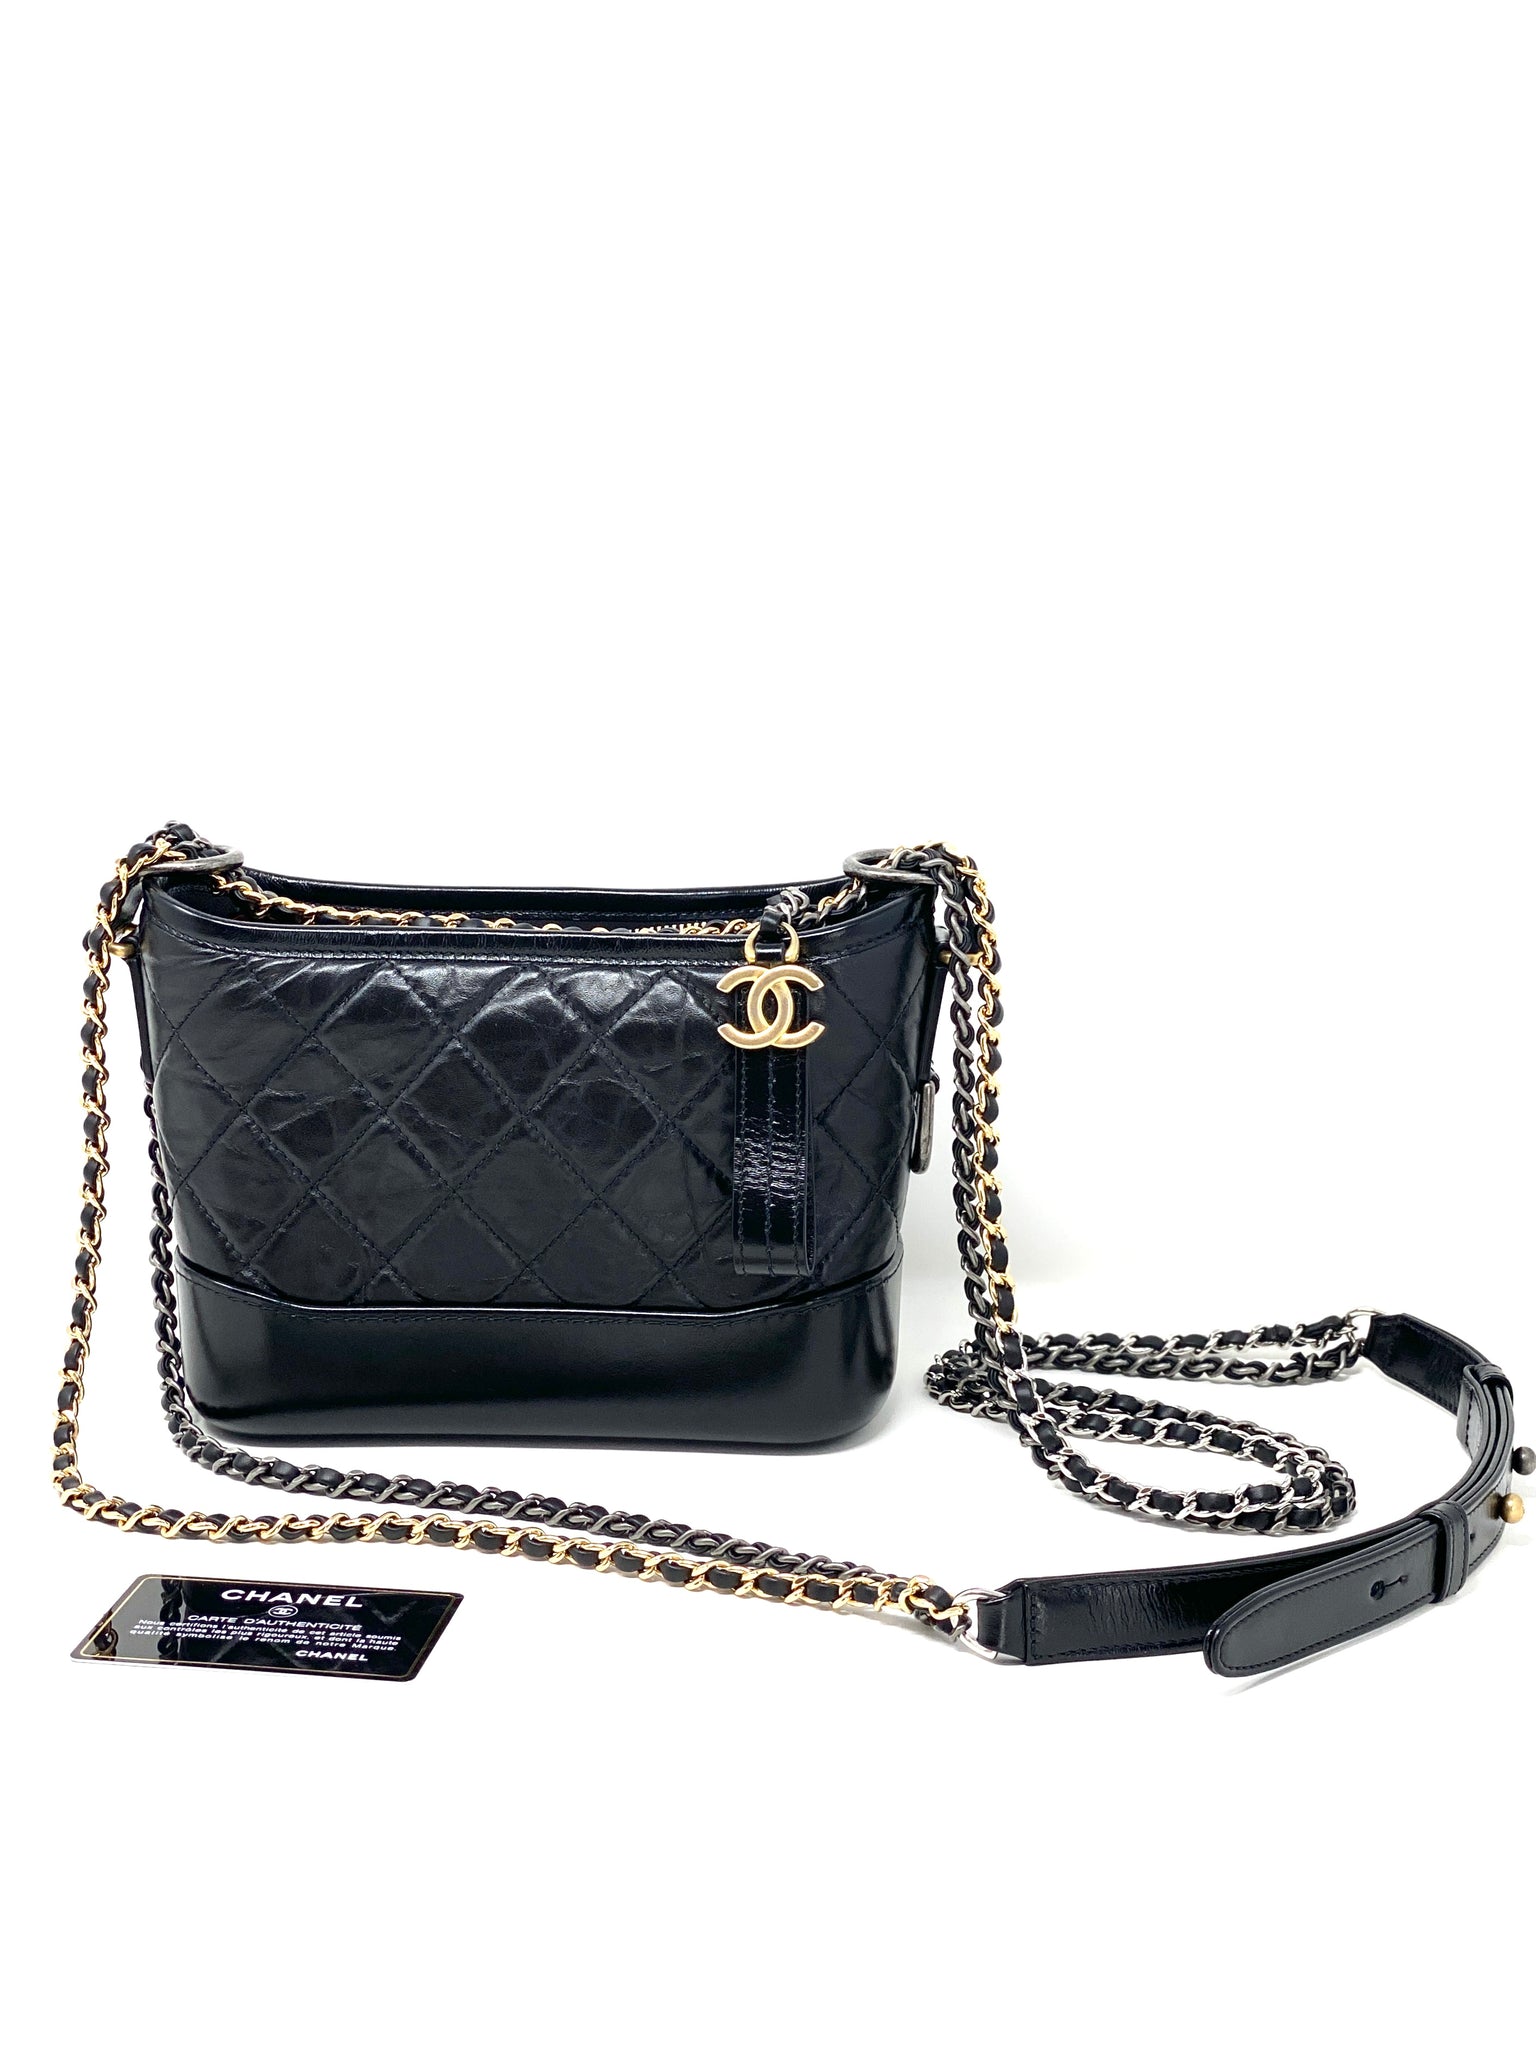 CHANEL, Bags, Chanel Gabrielle Hobo Small Size